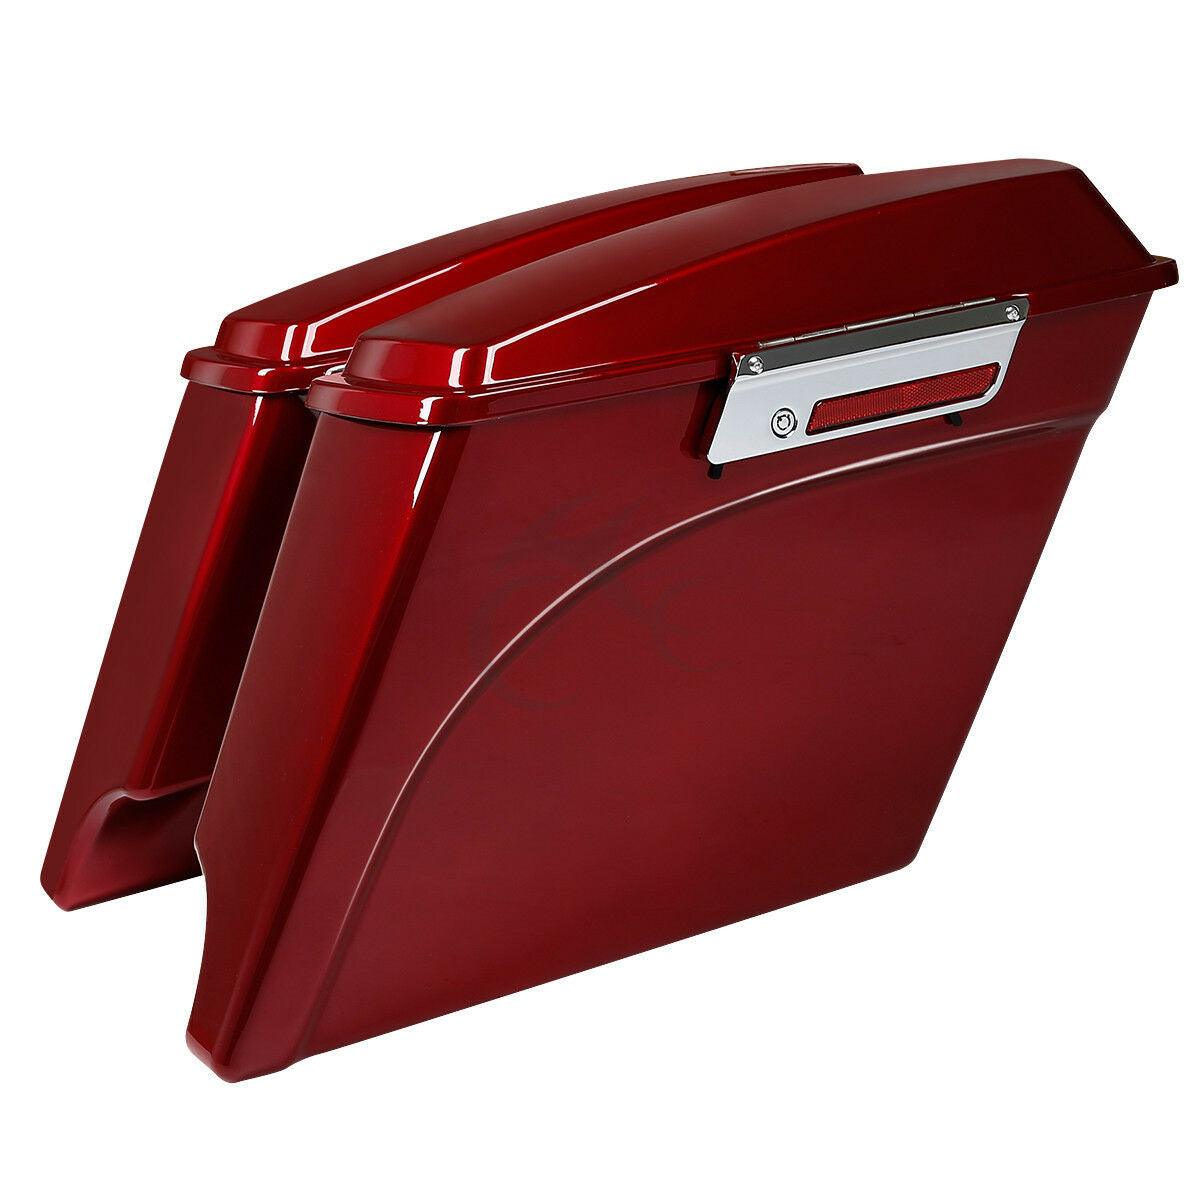 5" Stretched Extended Saddlebags Bag Fit For Harley Touring Electra Glide 93-13 - Moto Life Products